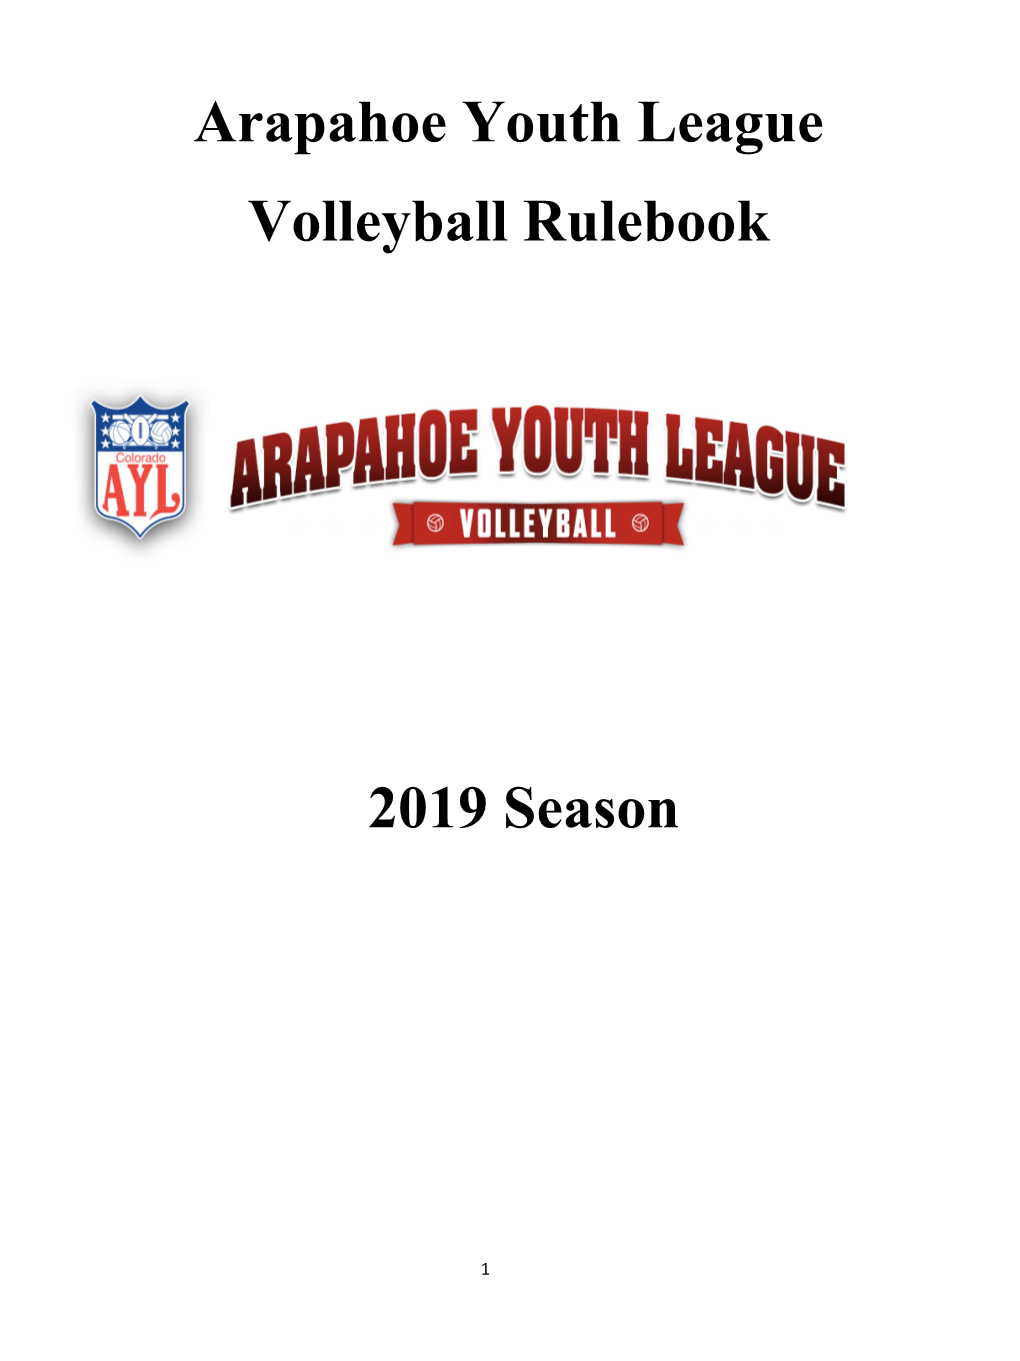 AYL Volleyball Rules Are Governed by the AYL By-Laws and General Principles of Operation Which Take Precedence Over These Rules